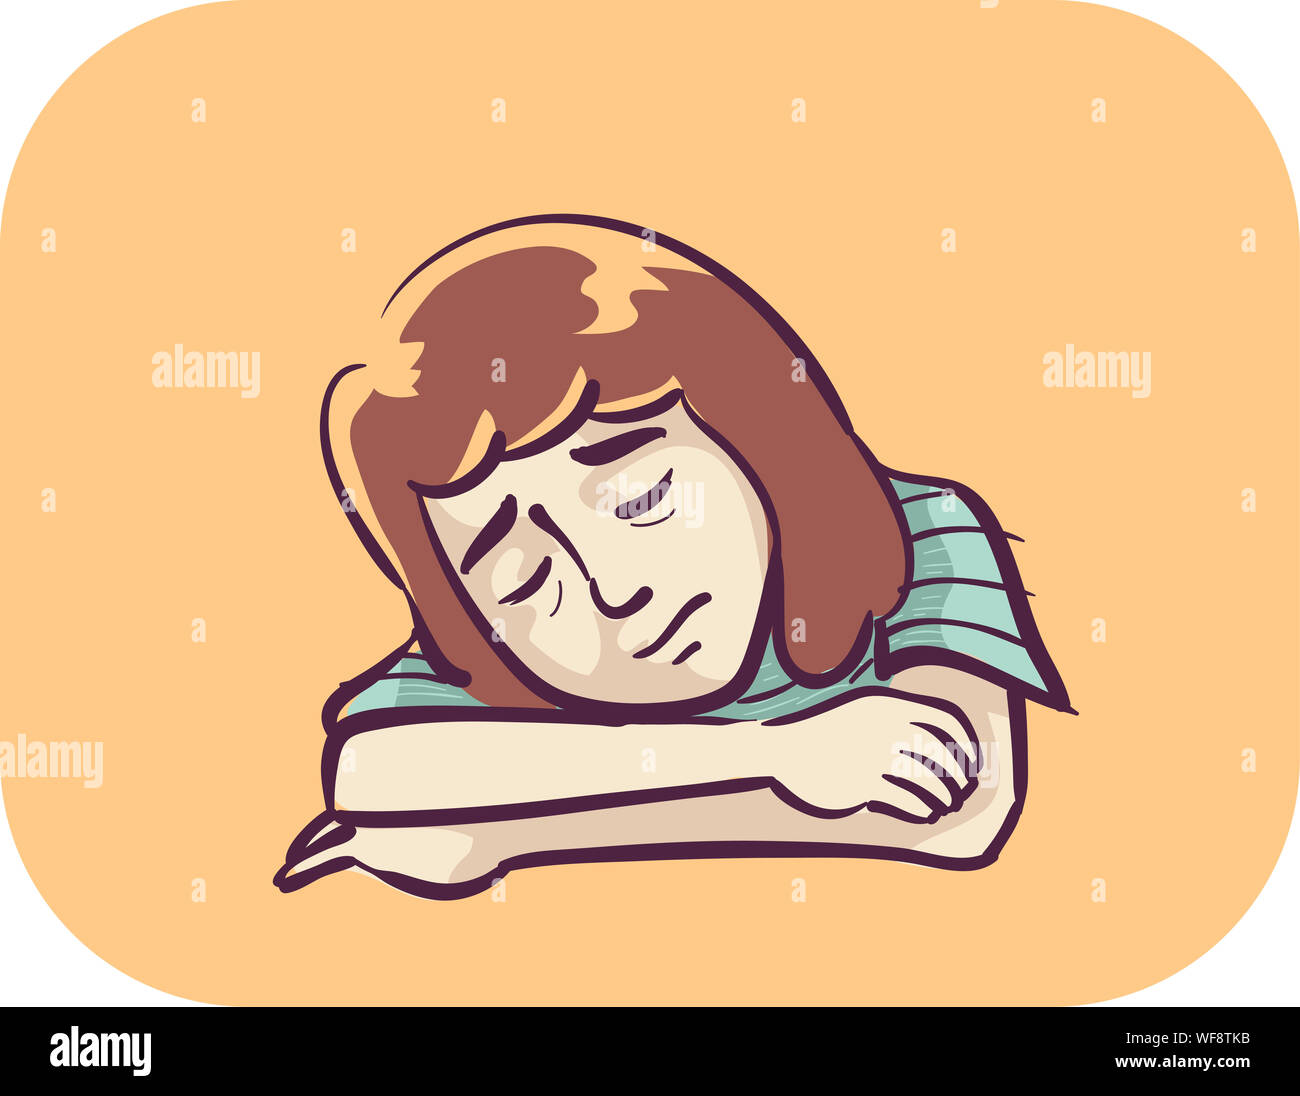 Illustration of a Girl Showing a Worried Face with Closed Eyes. Fatigue ...